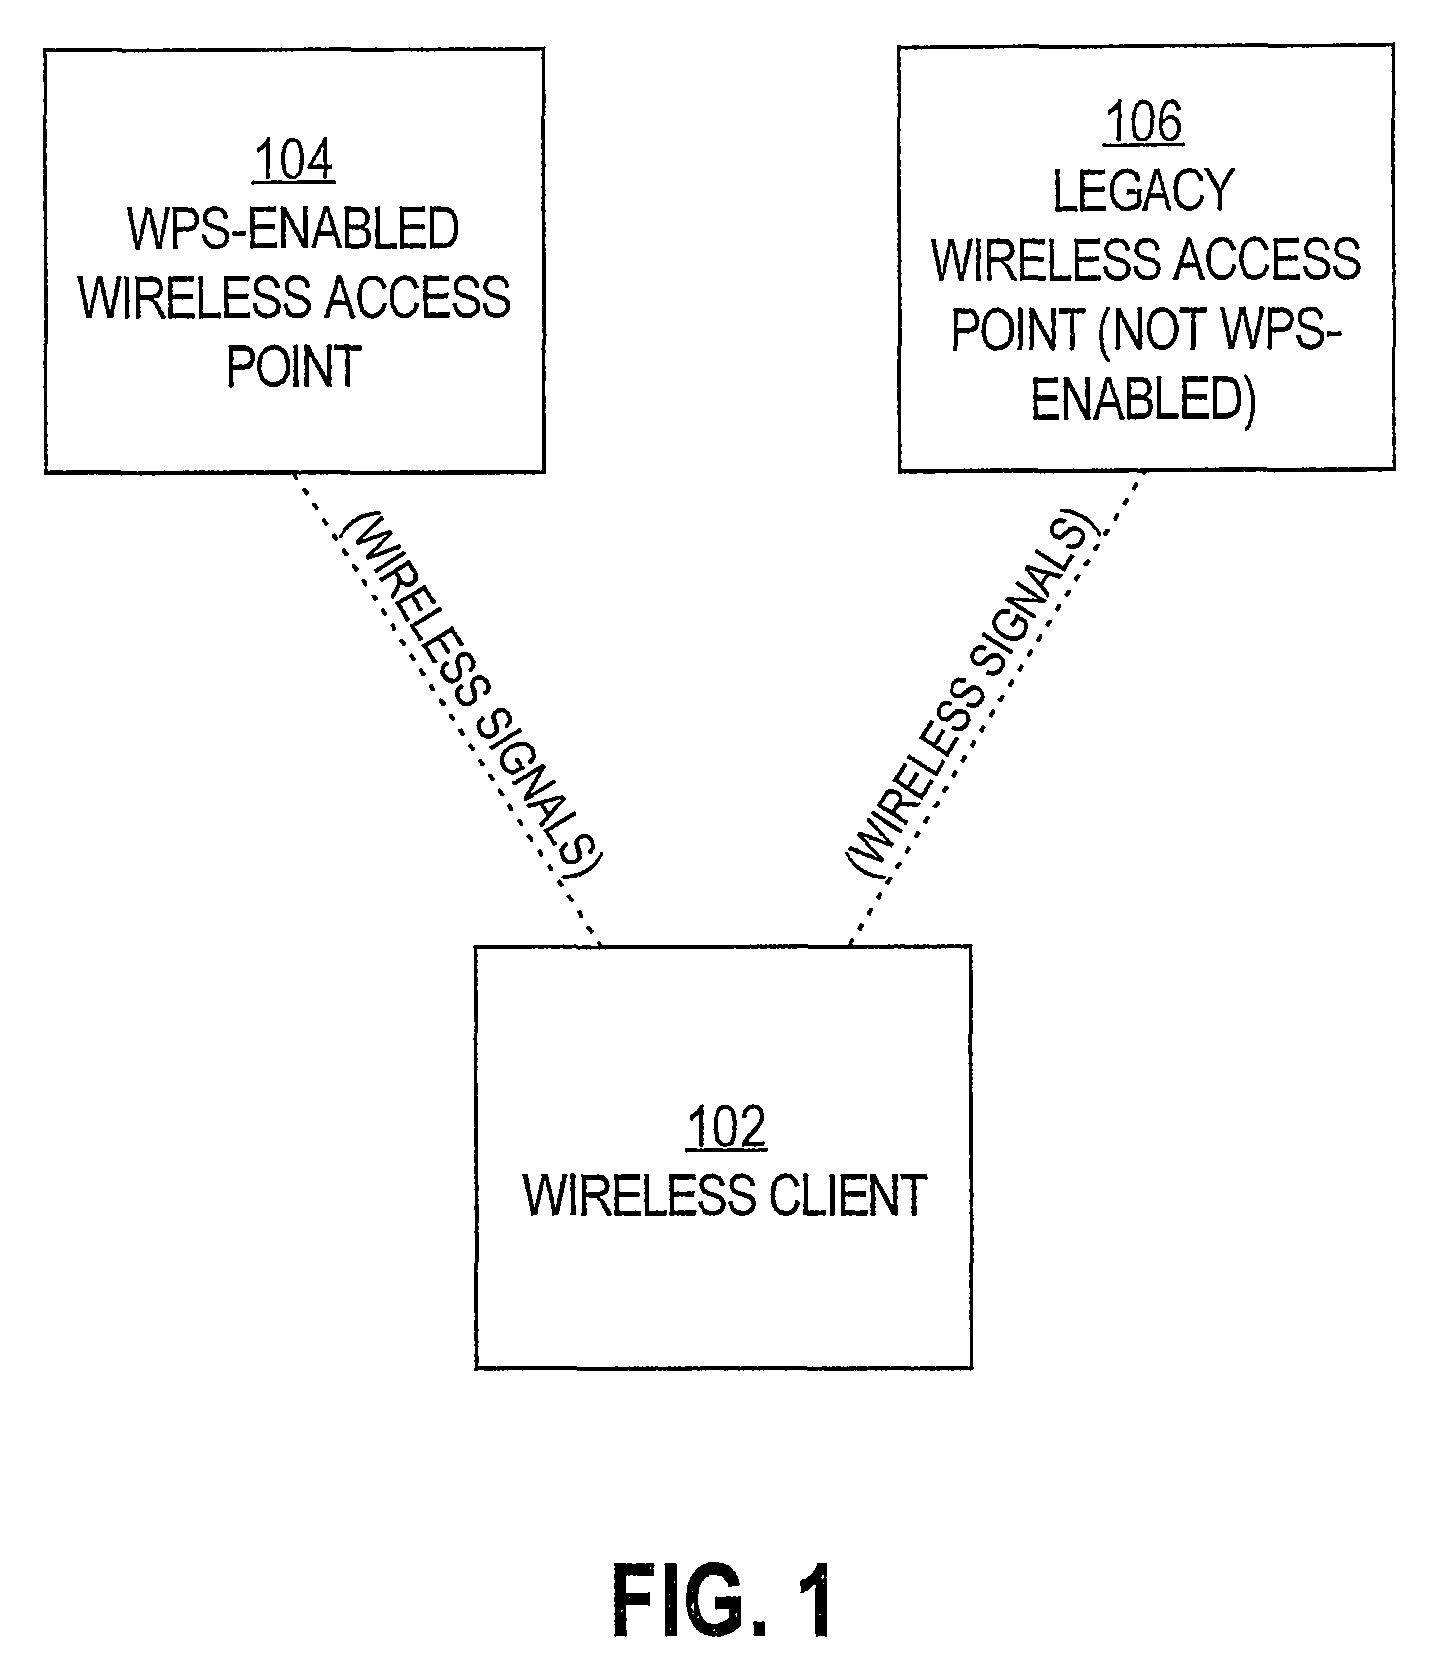 Legacy support for Wi-Fi protected setup